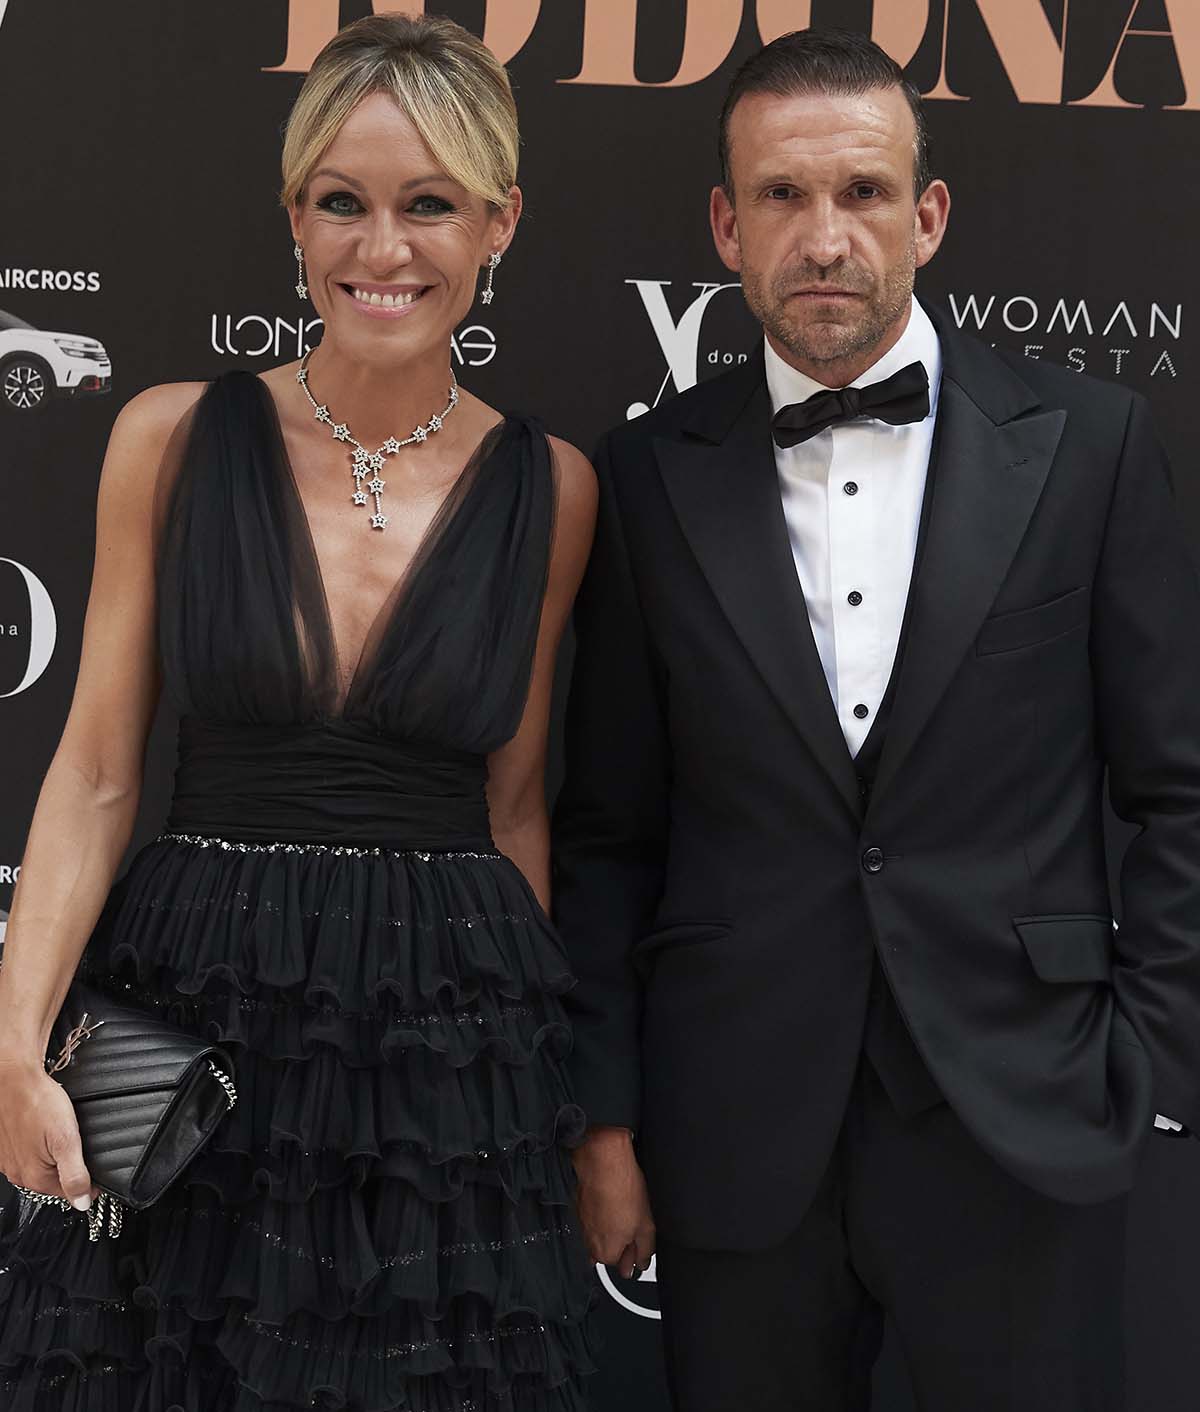 Presenter Lujan Arguelles and Carlos Sanchez at photocall of 14 edition Yo Dona Internacionales awards in Madrid on Monday, 24 June 2019.